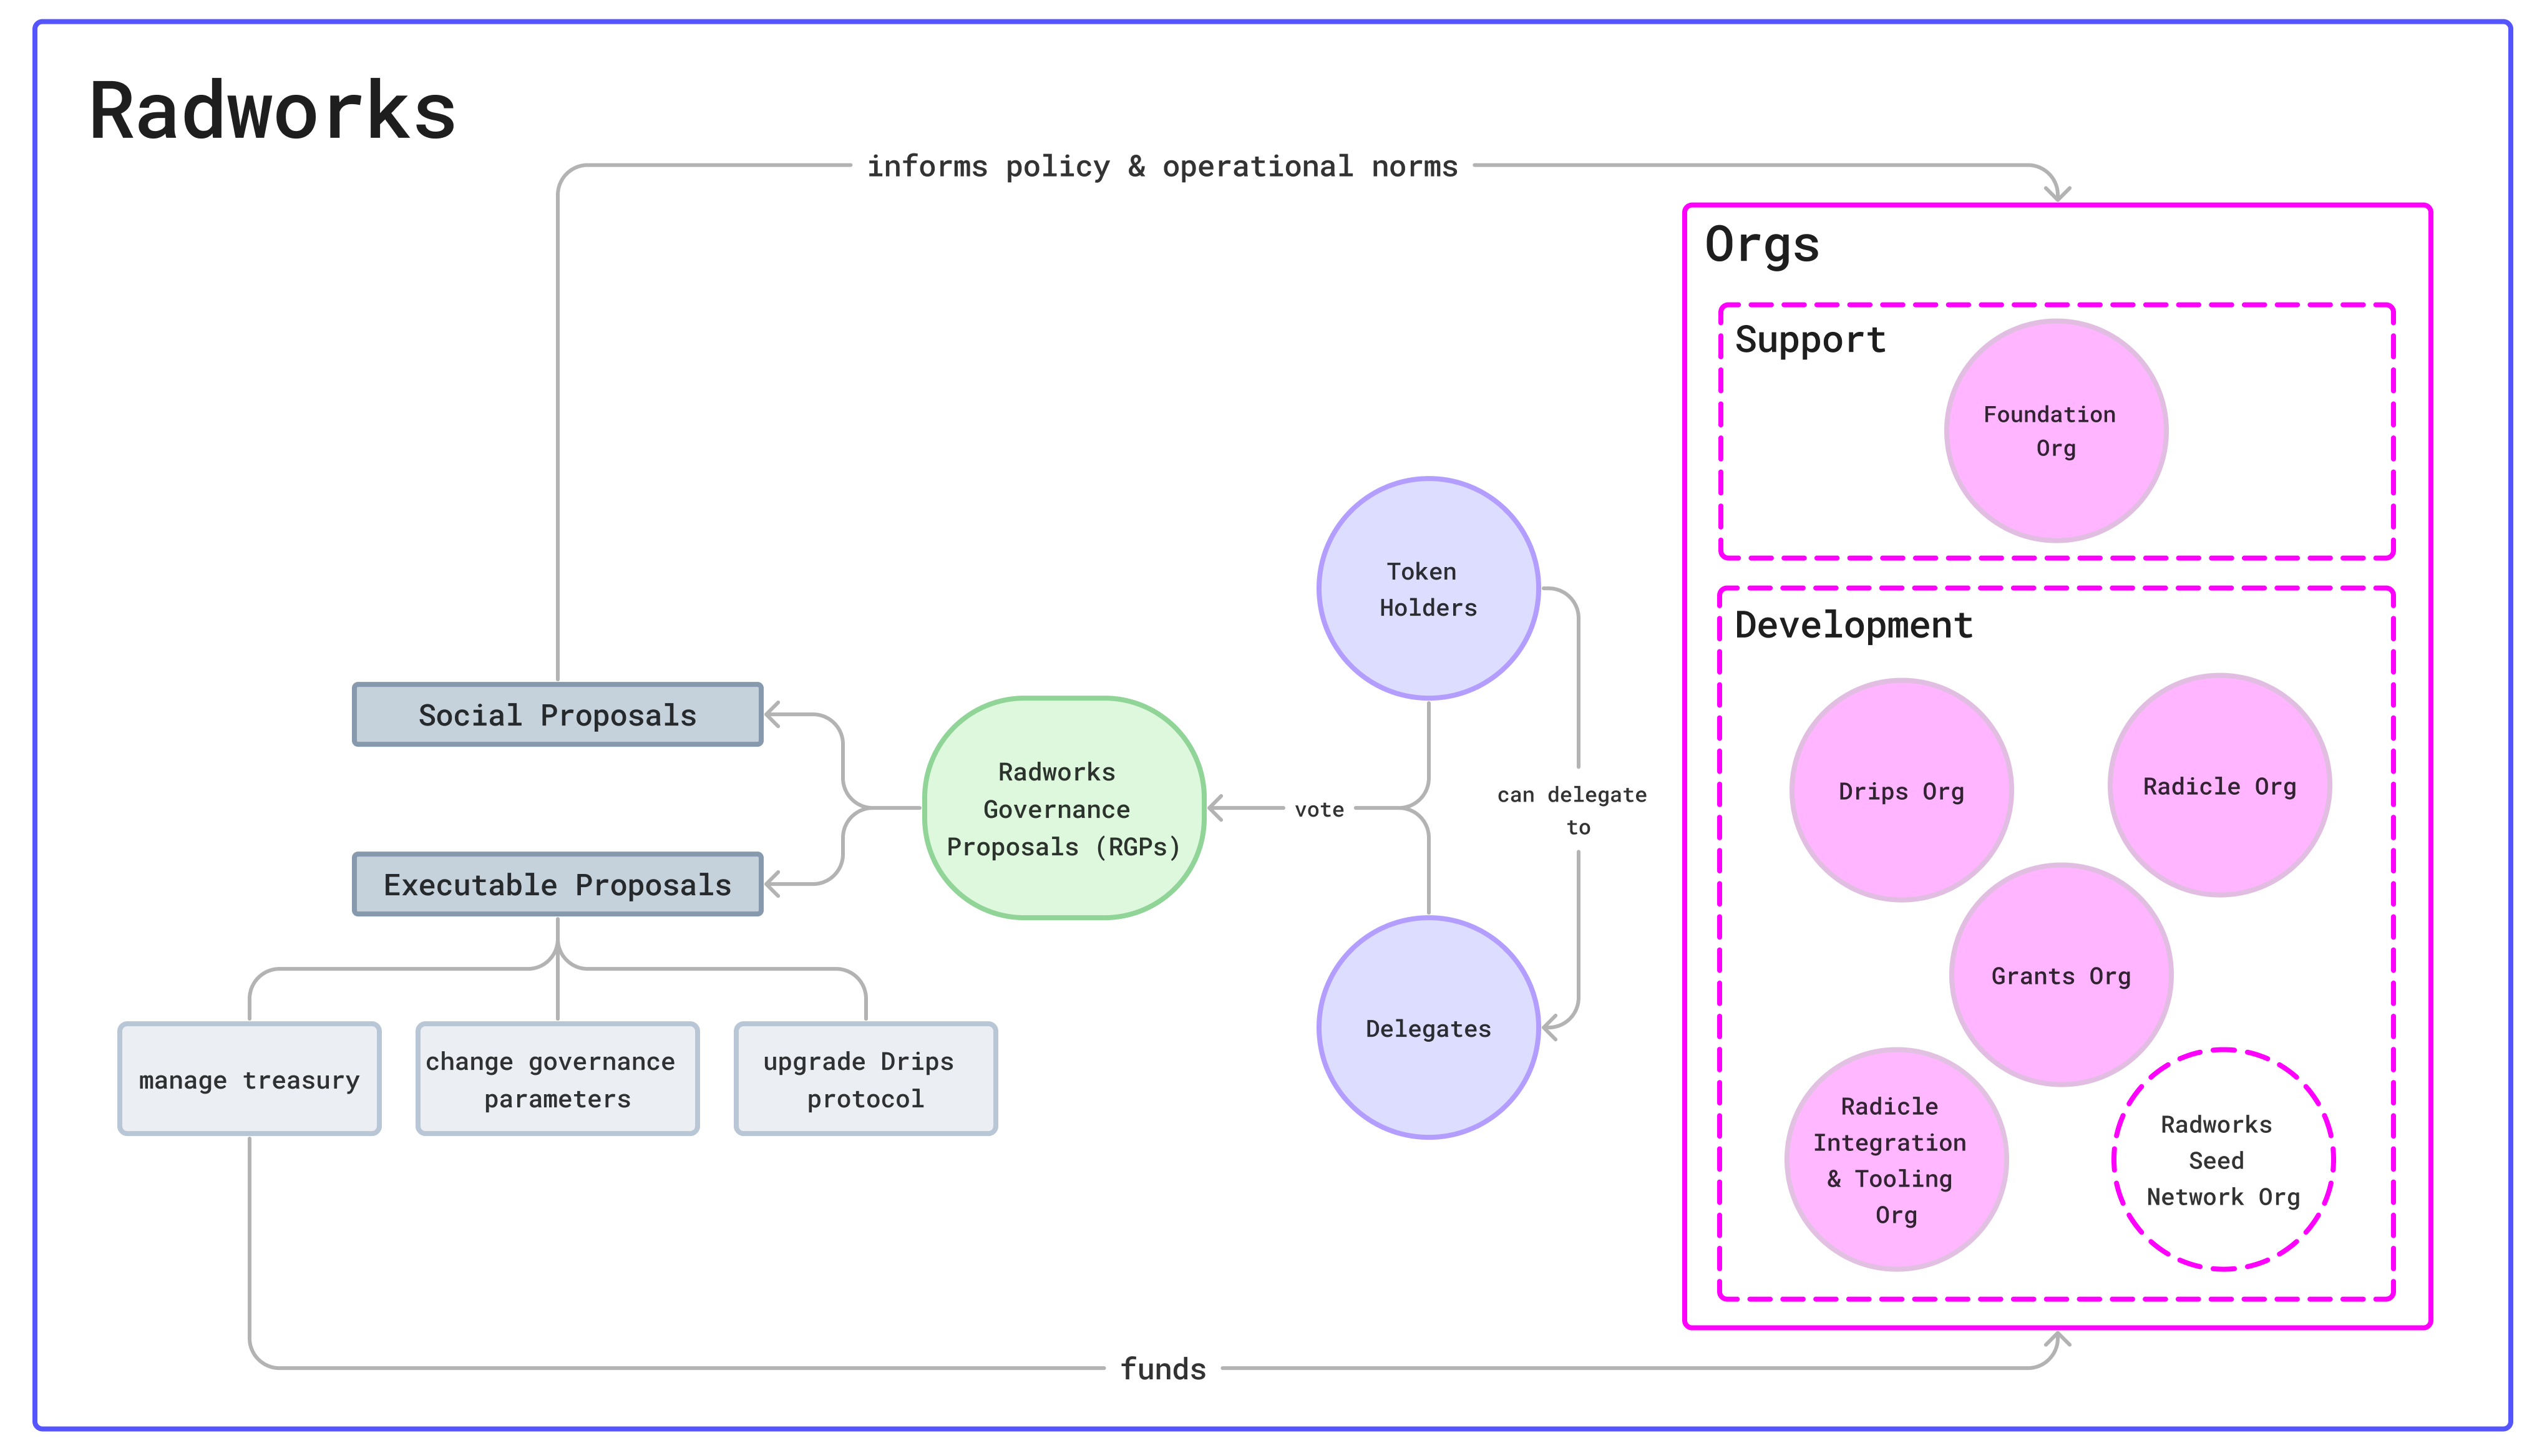 &quot;Diagram of the Radworks ecosystem, with Radworks encompassing multiple Orgs, each of which have one or more Teams consisting of one or more Contributors&quot;